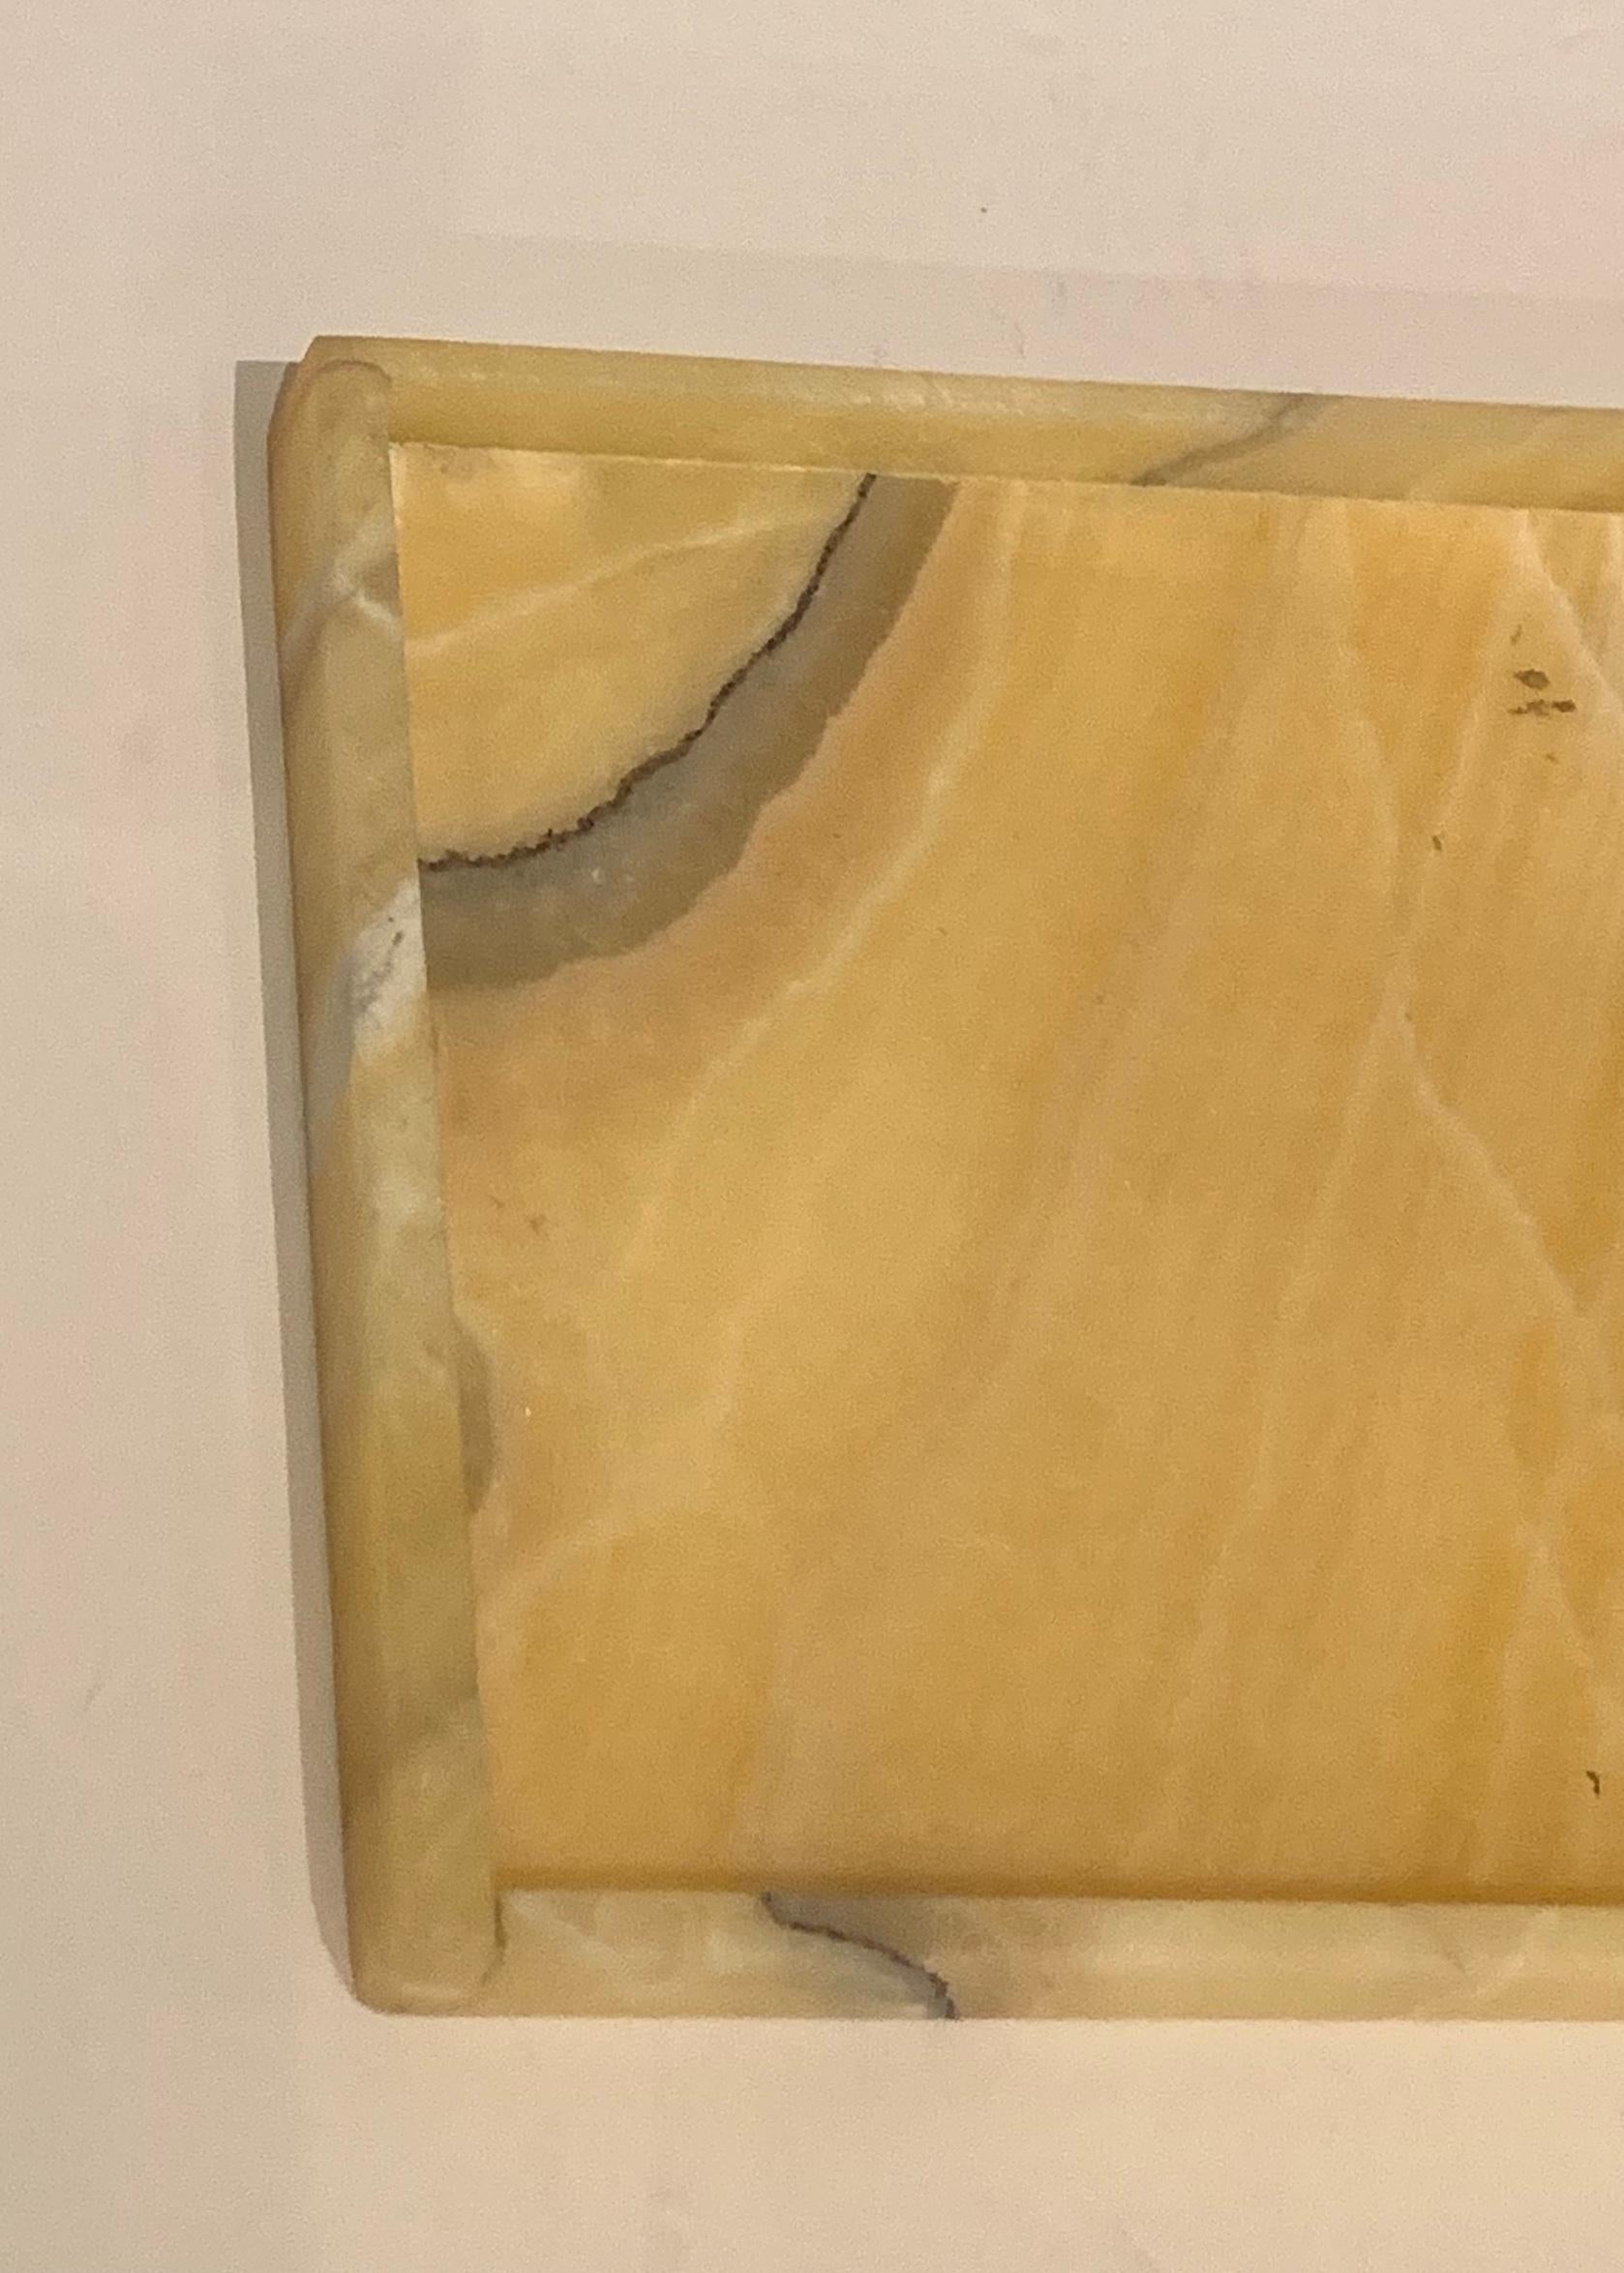 Rectangular shaped onyx tray with small lip border.
Gold in color with natural veins running through the onyx.